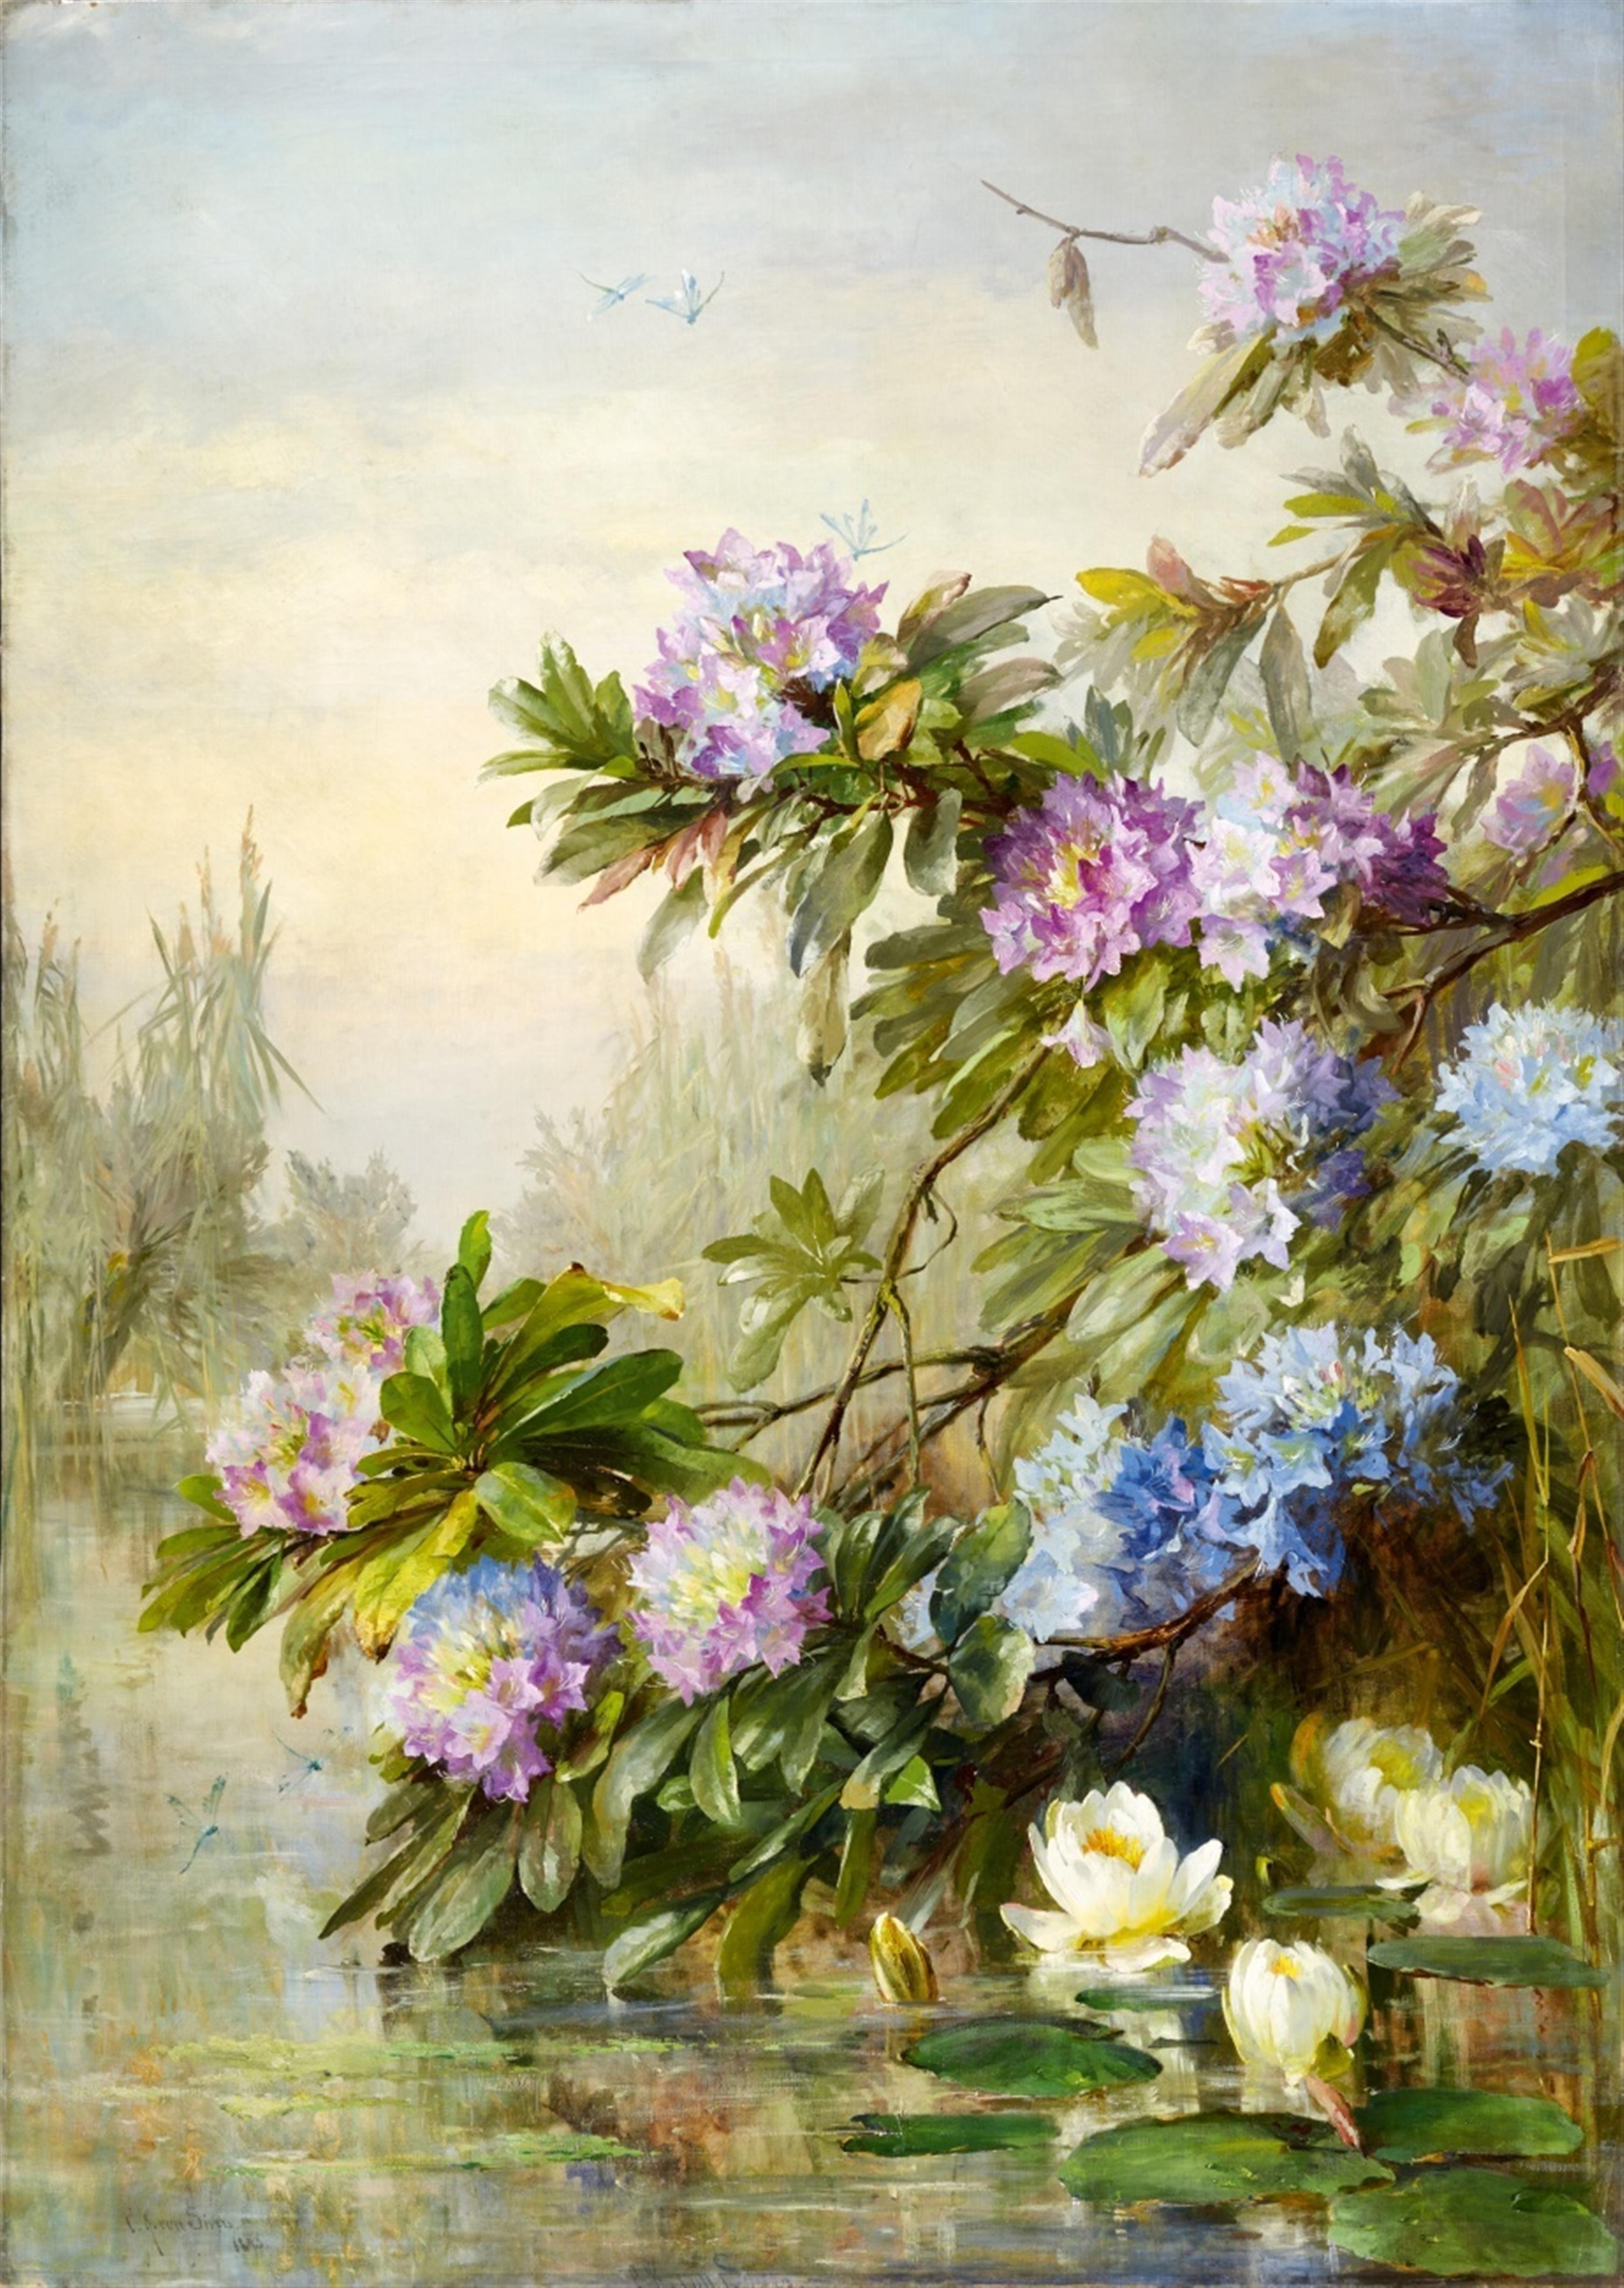 Clara von Sivers - A Landscape View with Spring Flowers - image-1